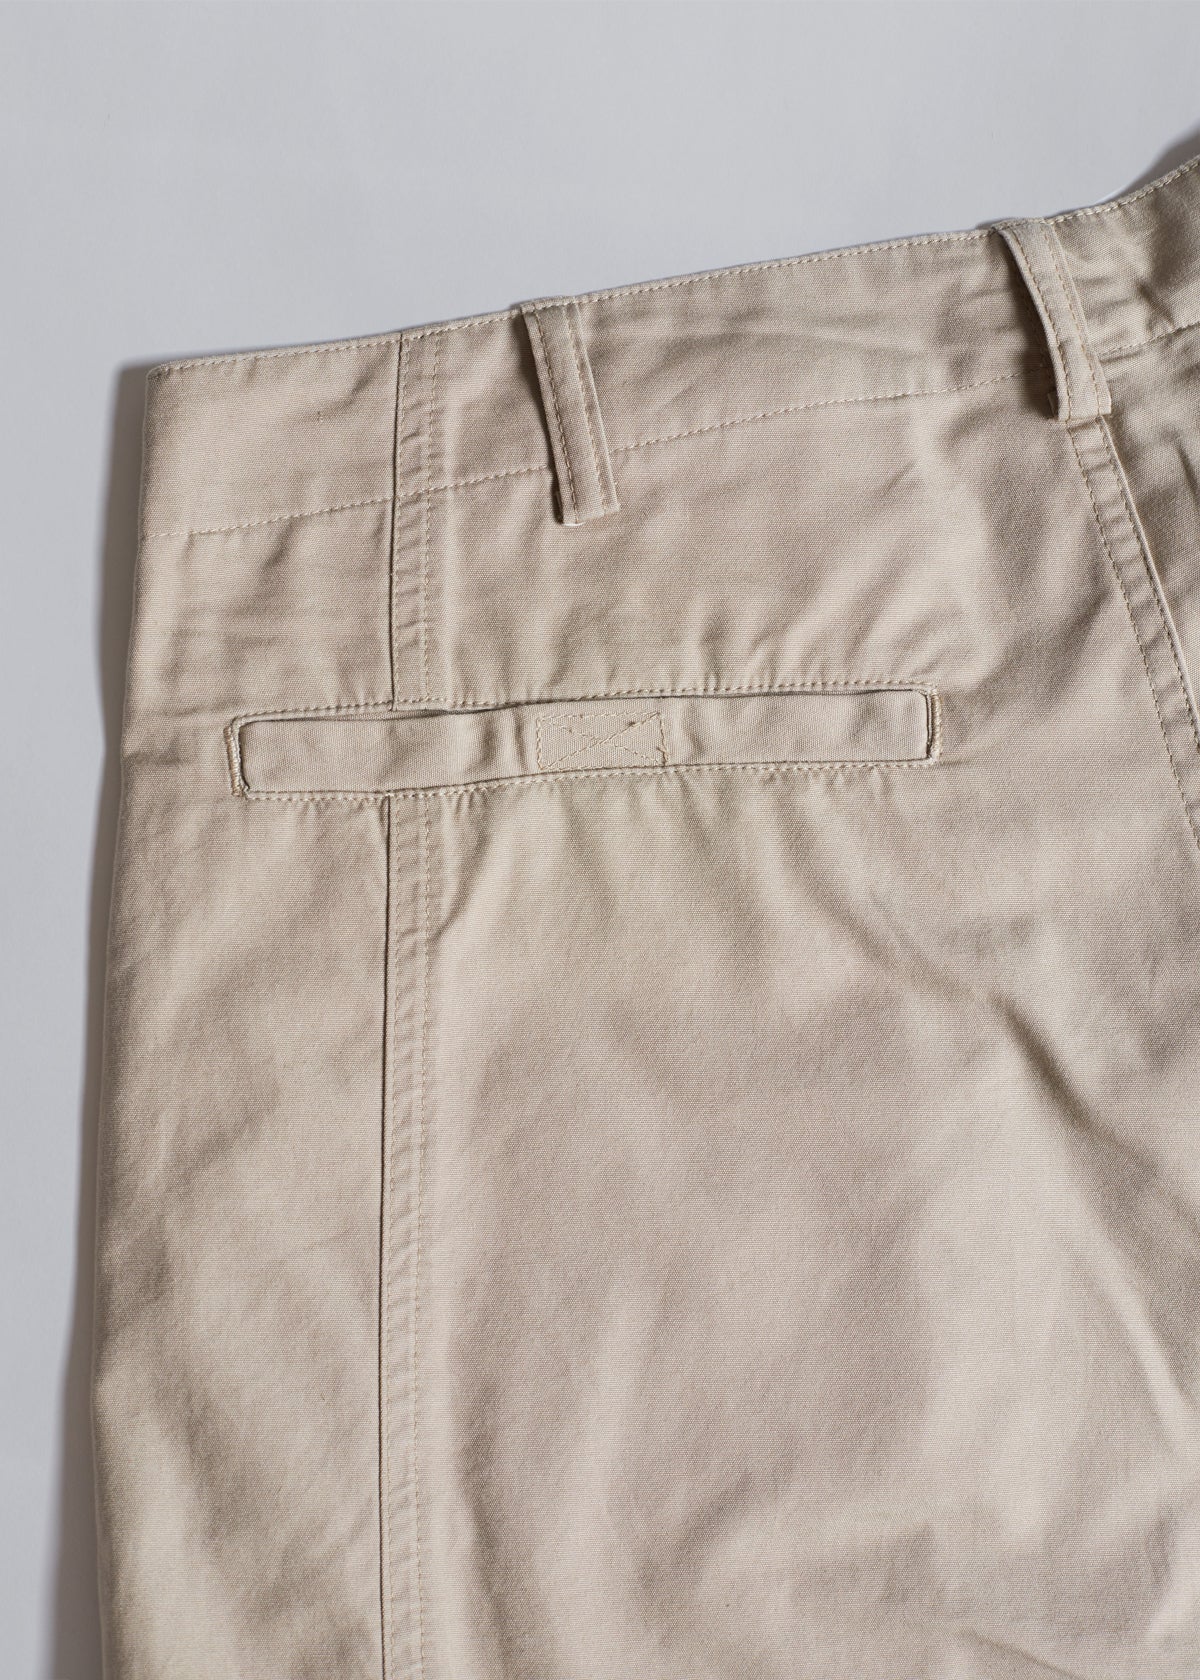 Hiking Cargo Shorts 1990's - Large - The Archivist Store